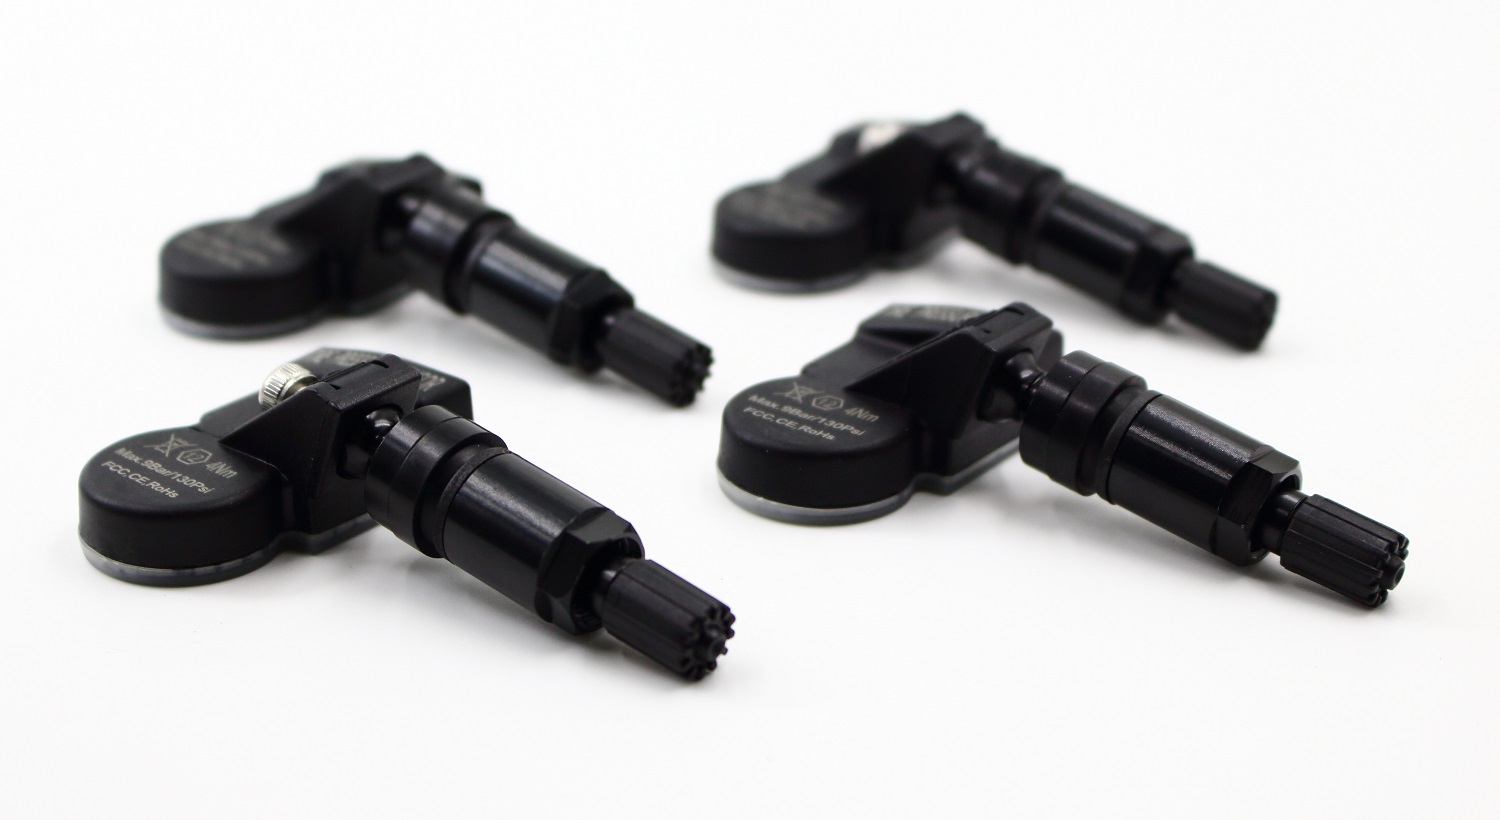 Gloss Black ITM Set of 4 315mhz TPMS Tire Pressure Sensors Replaces Ford OE Part # F2GZ-1A189-A w/Gloss Black or Matte Black Aluminum Valve Stems Replacement 